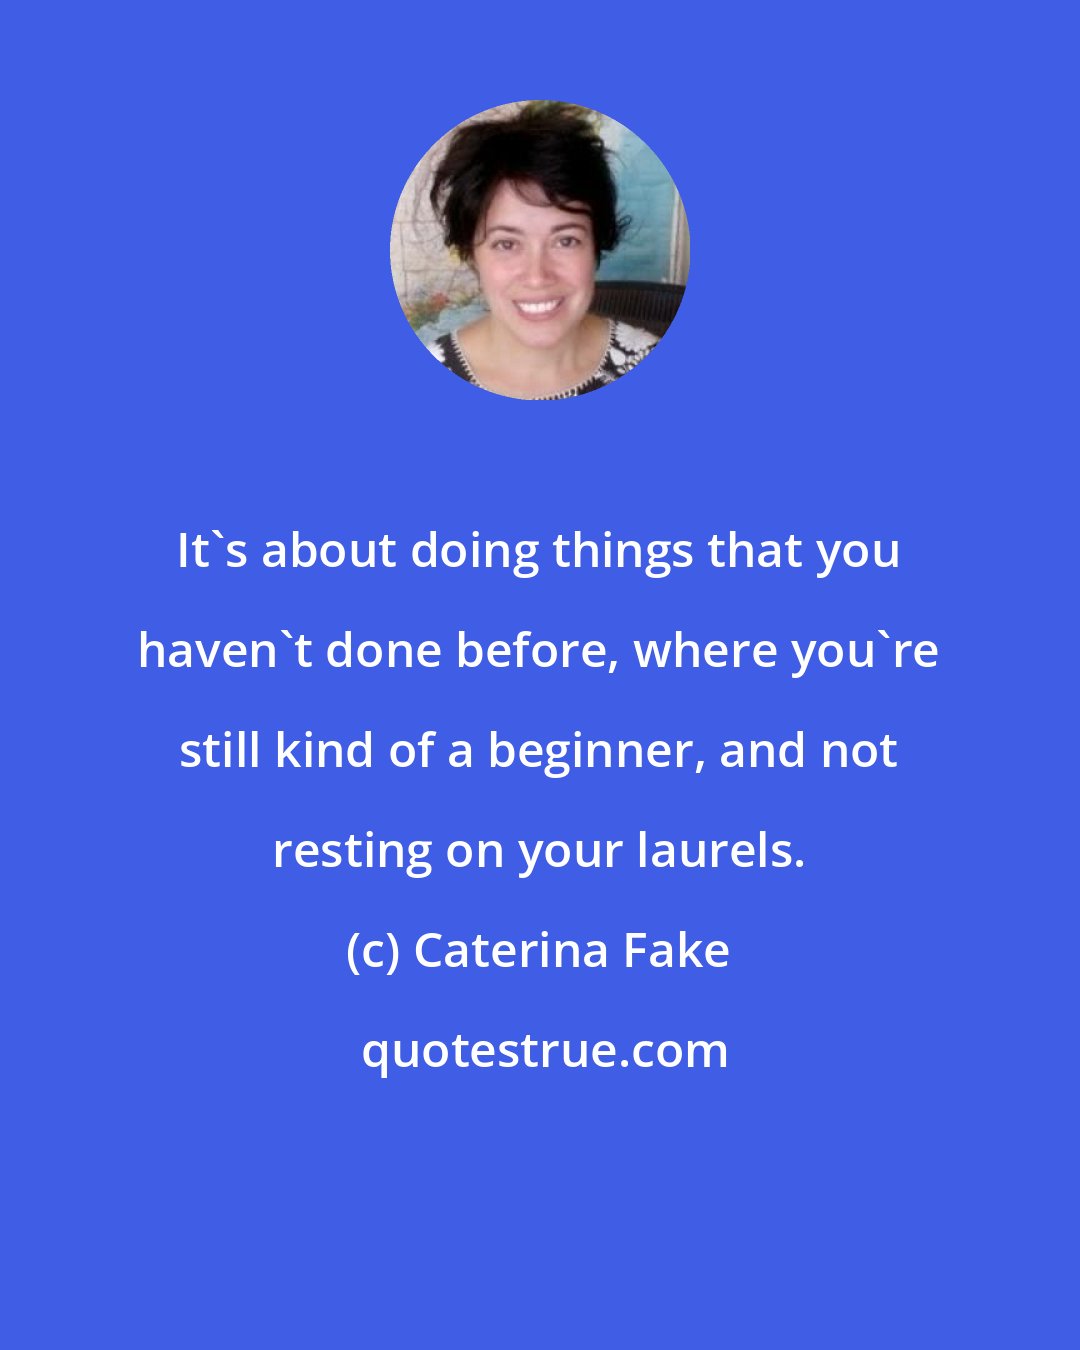 Caterina Fake: It's about doing things that you haven't done before, where you're still kind of a beginner, and not resting on your laurels.